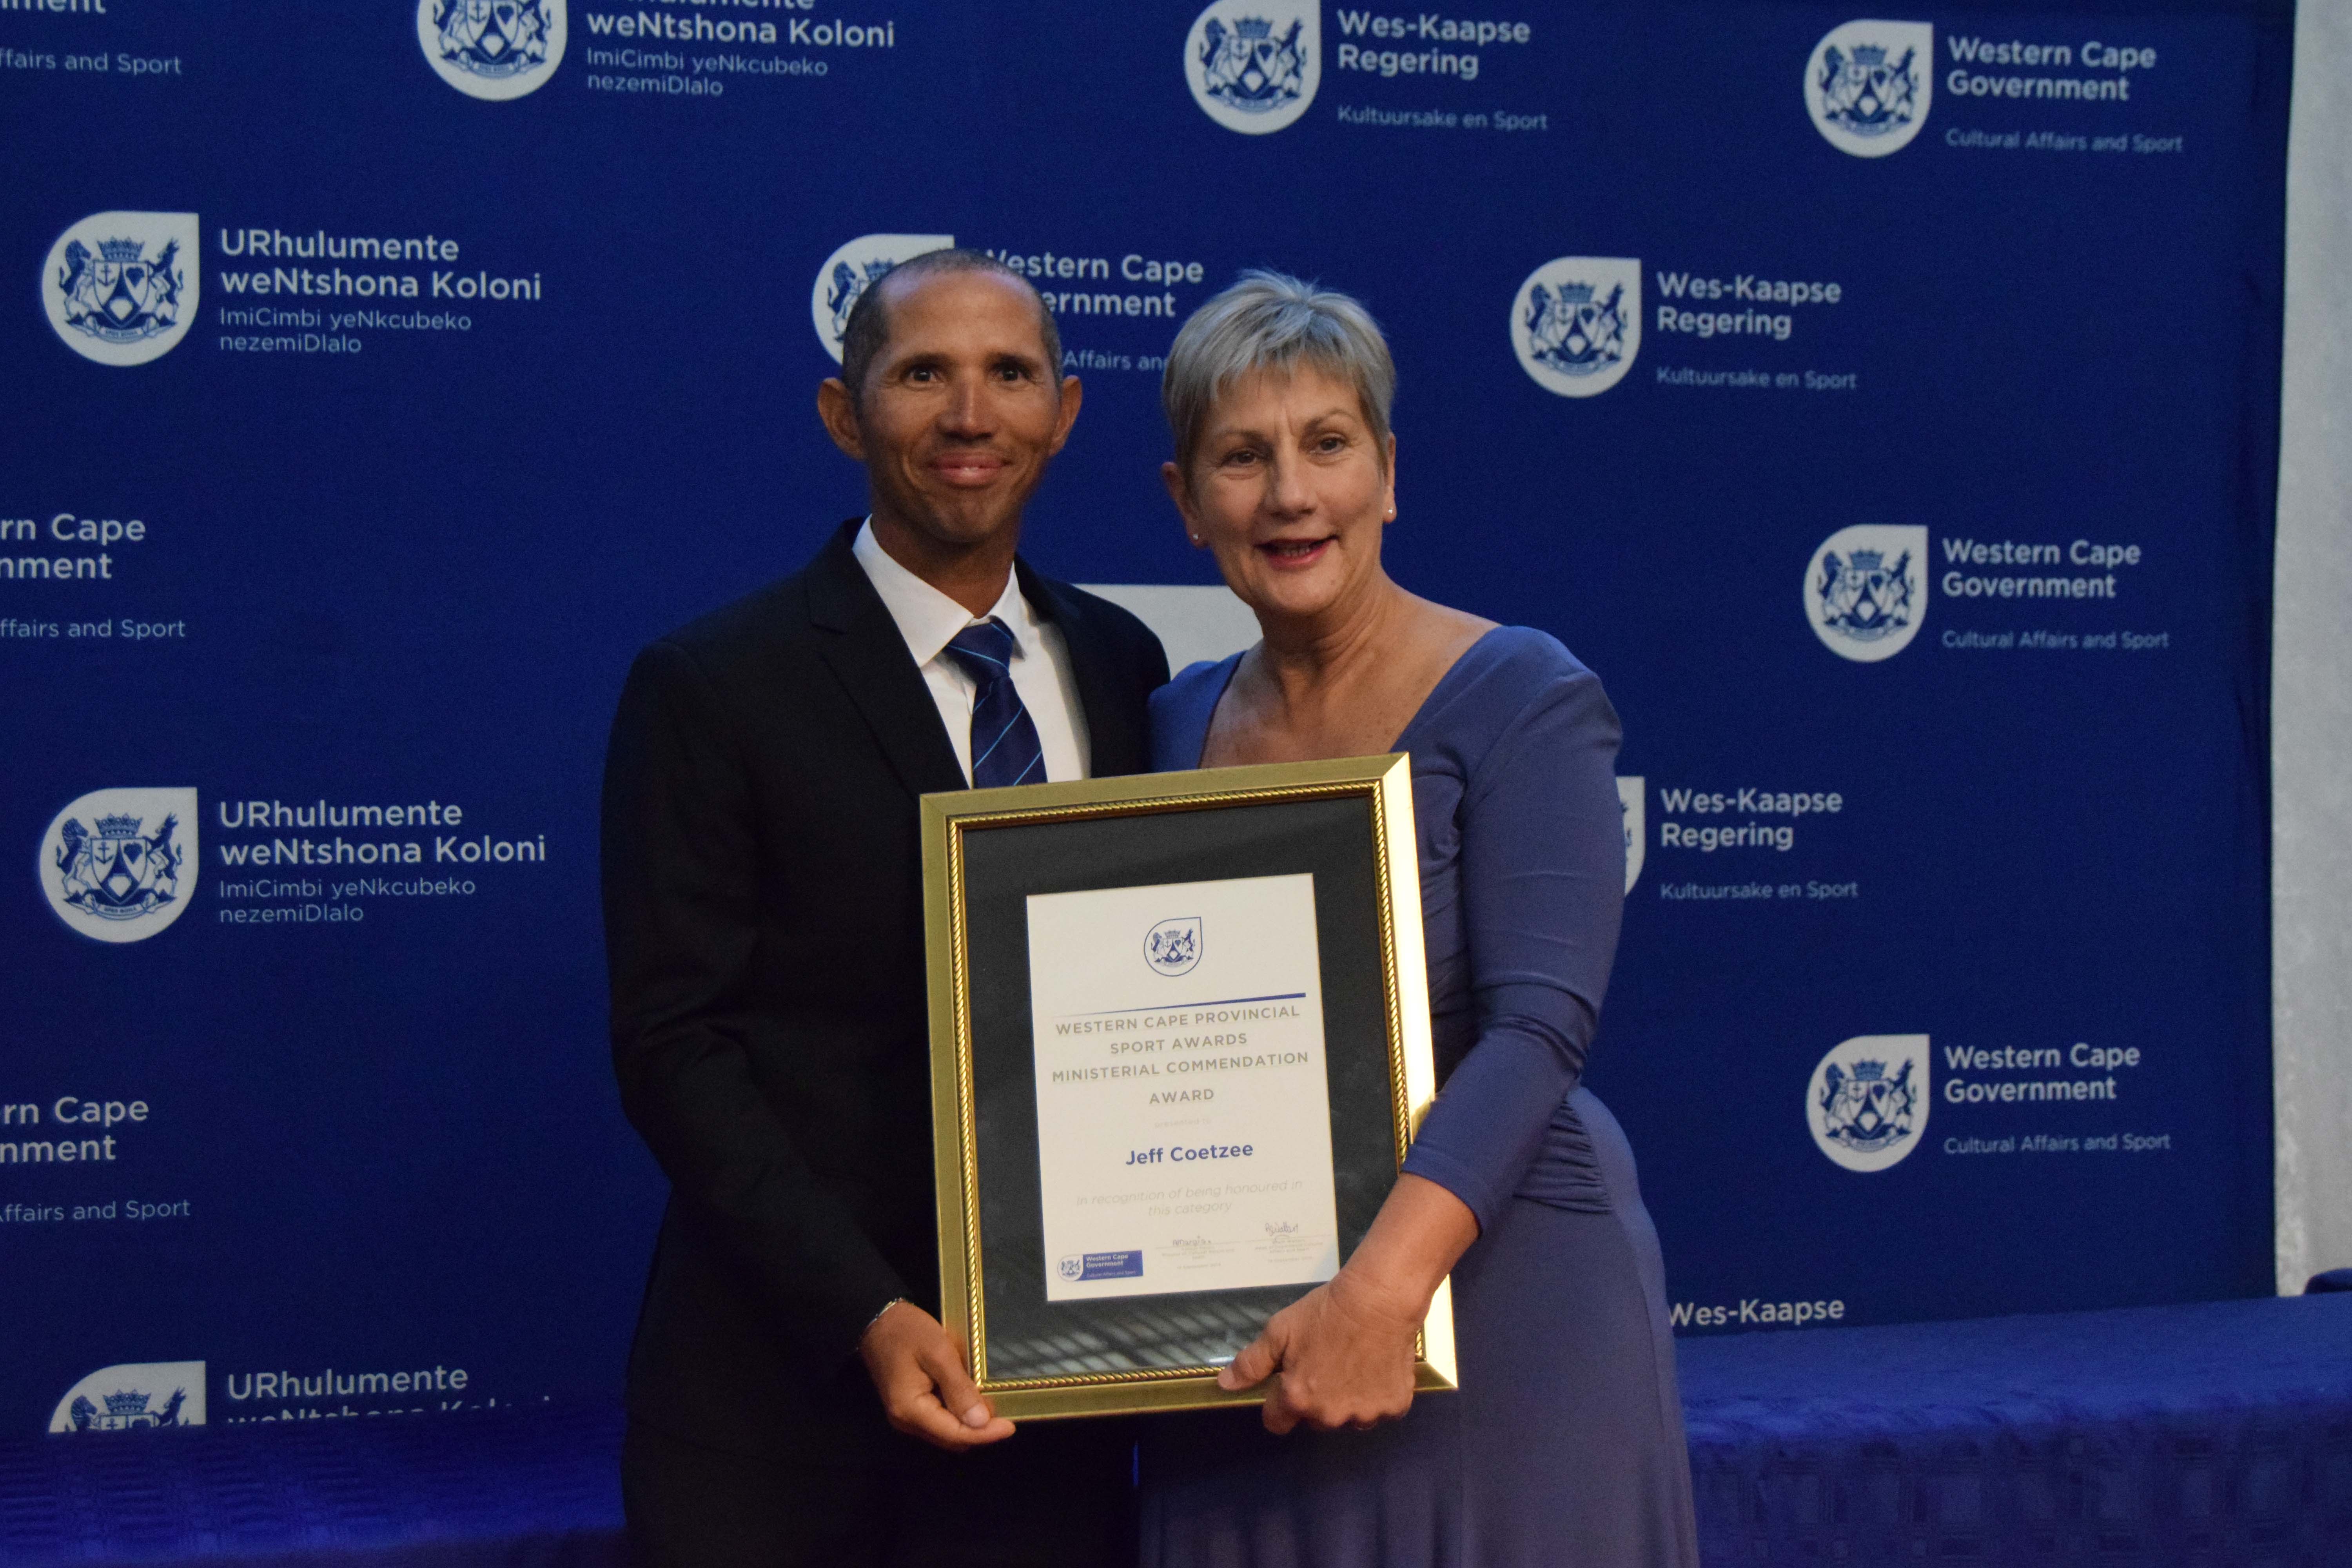 Minister Anroux Marais with Jeff Coetzee, recipient of a Ministerial Commendation